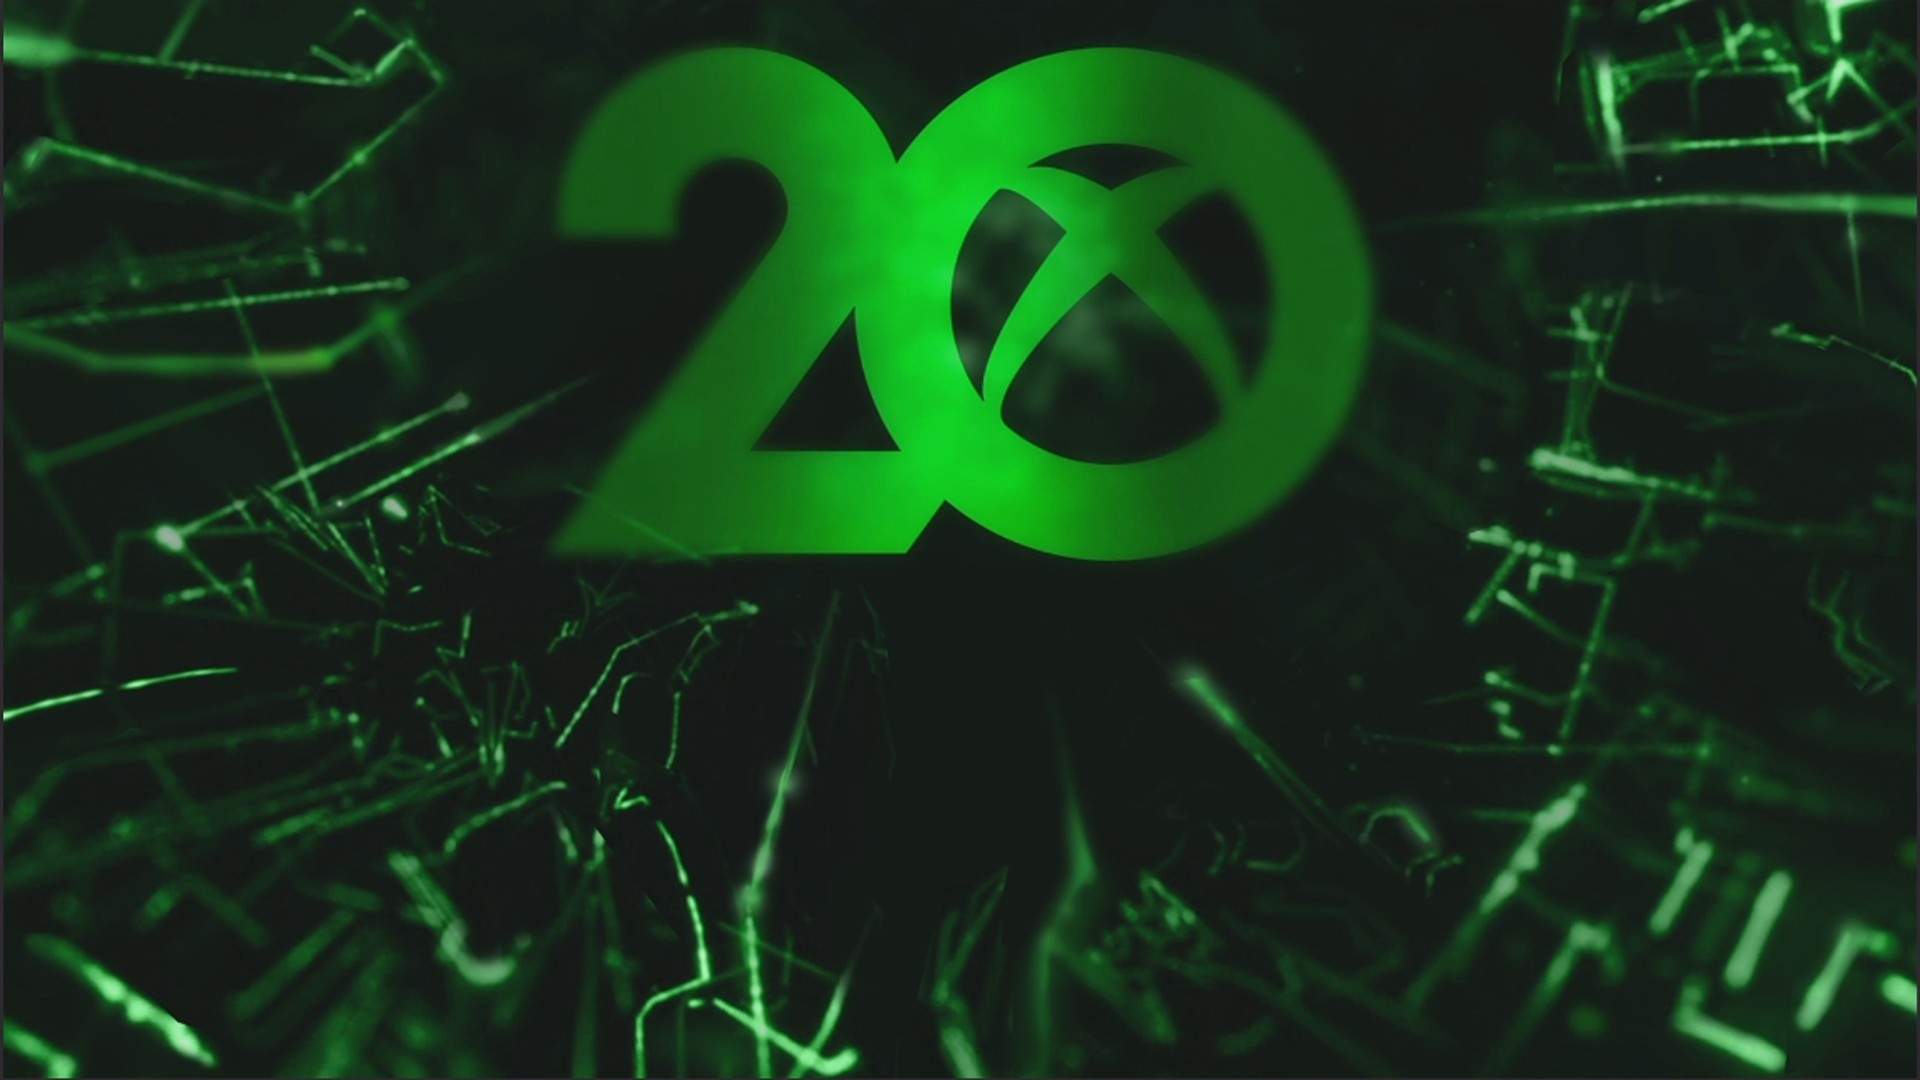 once again shoot wheat Xbox 20th anniversary stream: When, where and how to watch | VG247